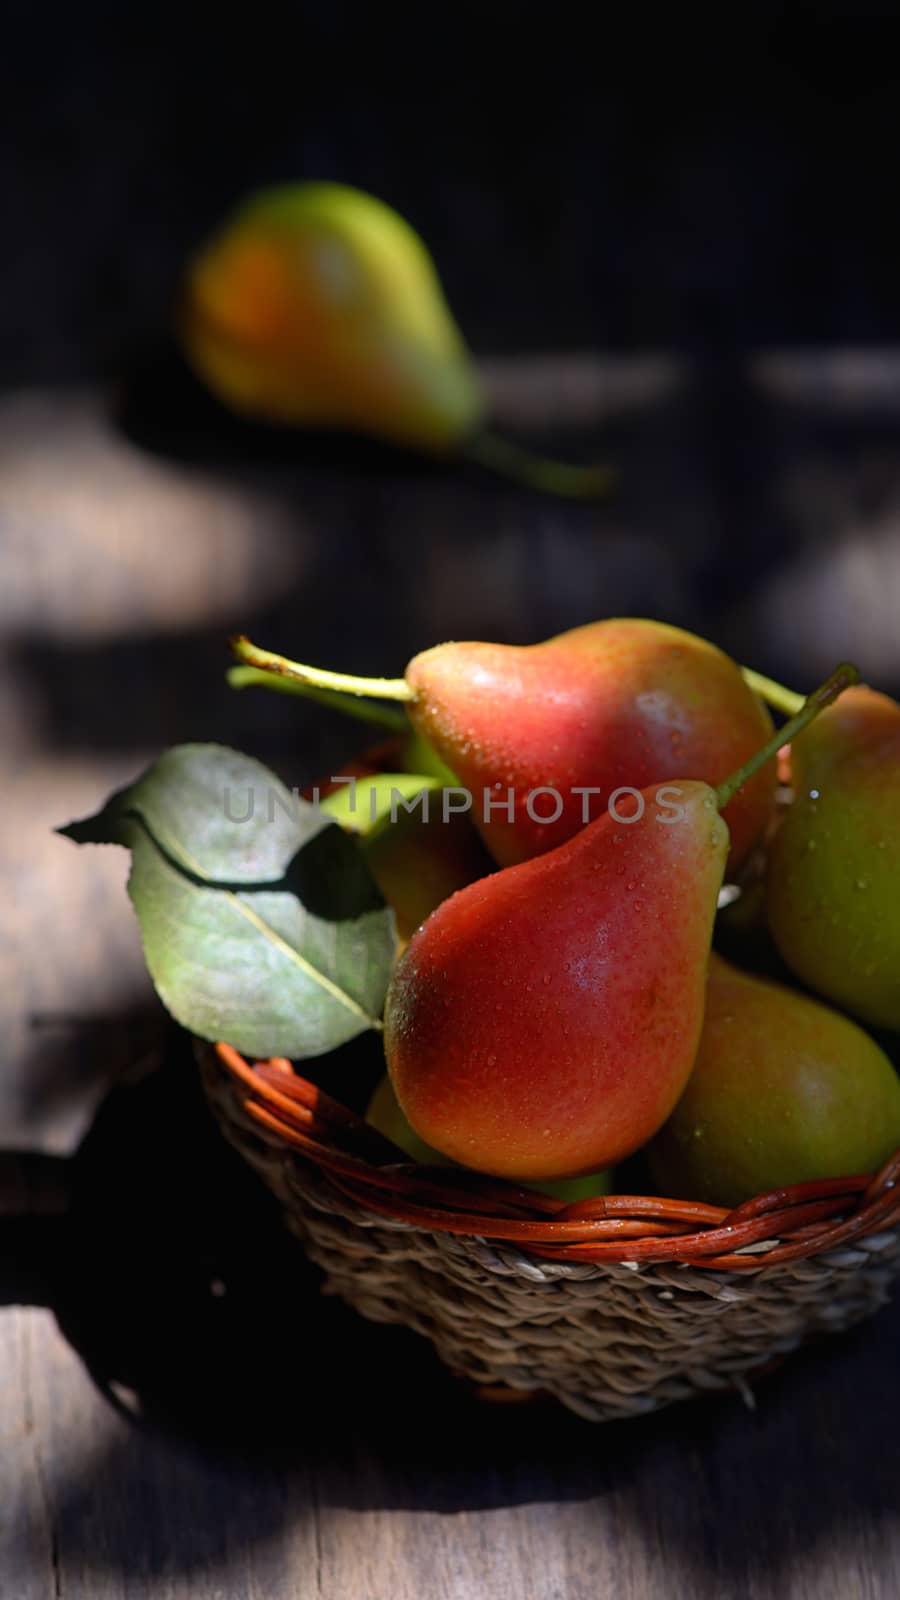 Pears in a basket by mady70